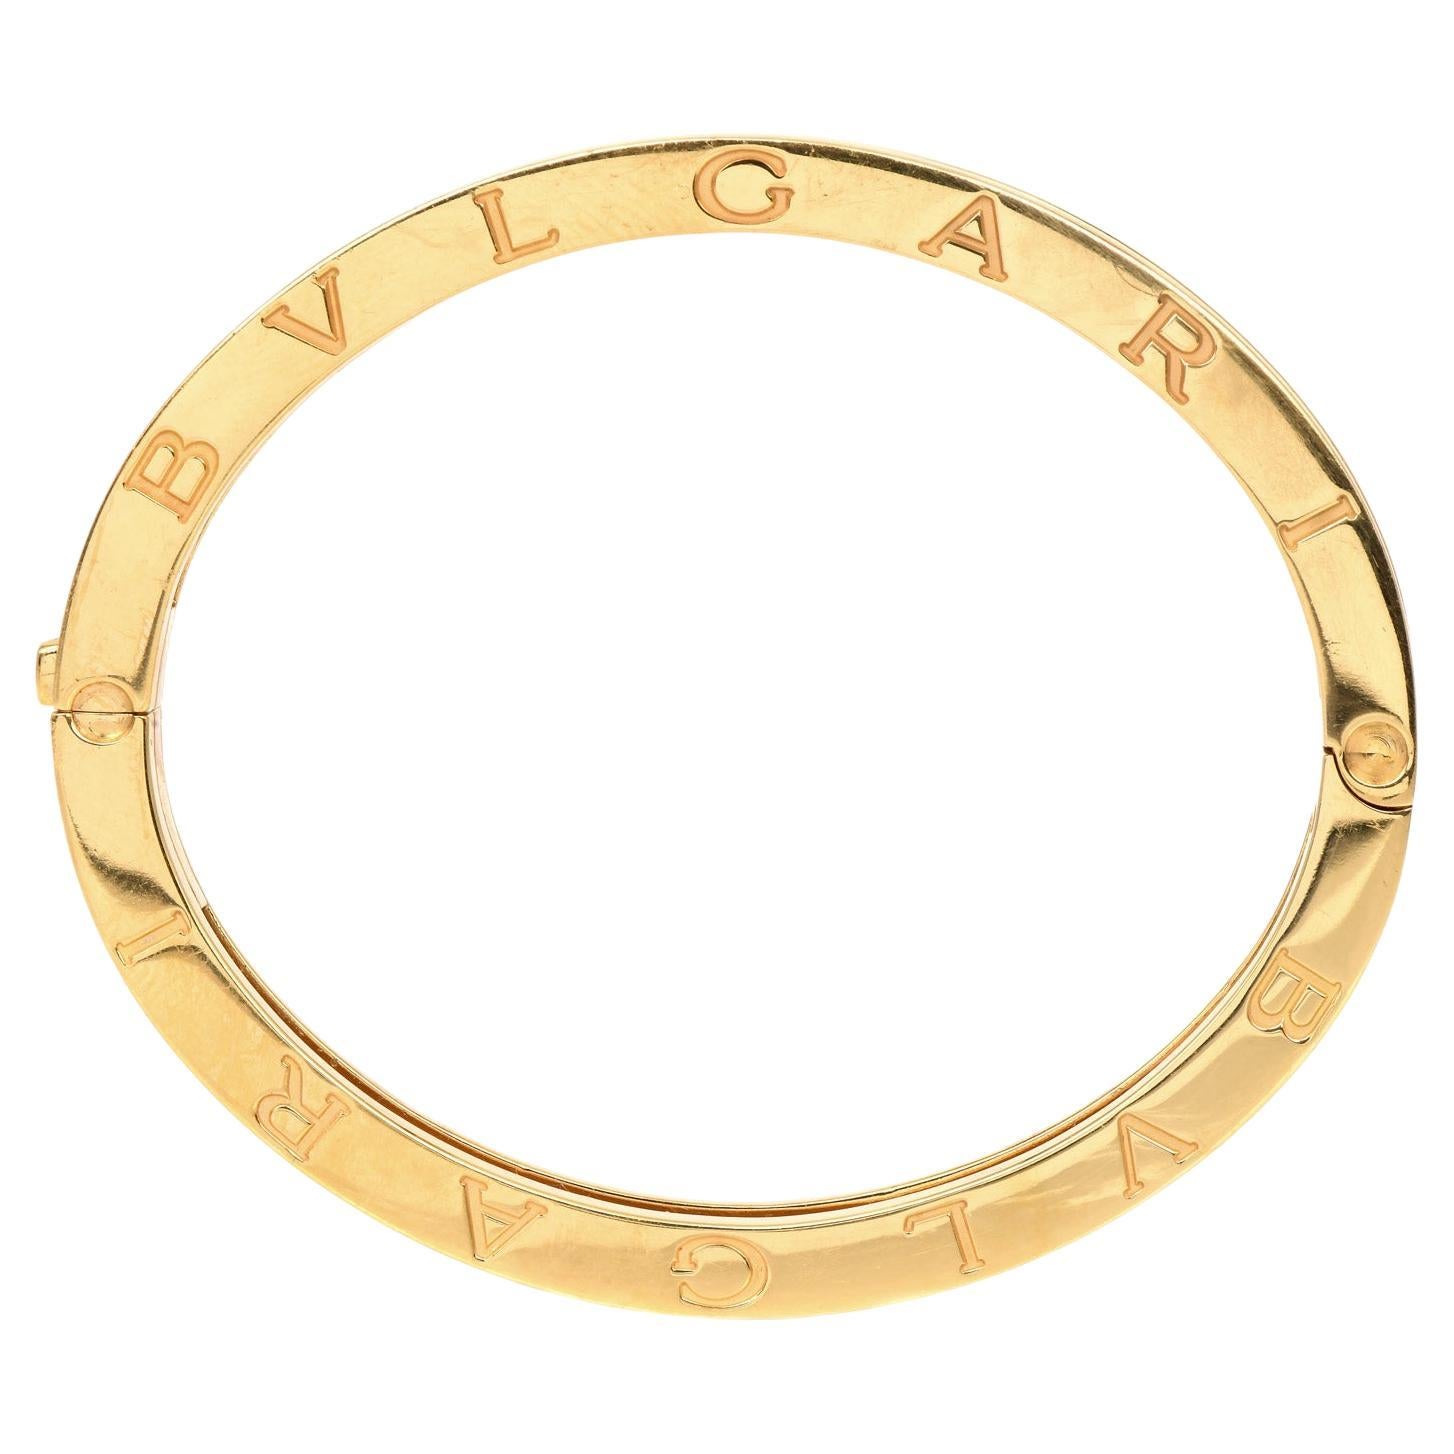 Bvlgari Jewelry - 1,383 For Sale at 1stdibs | 